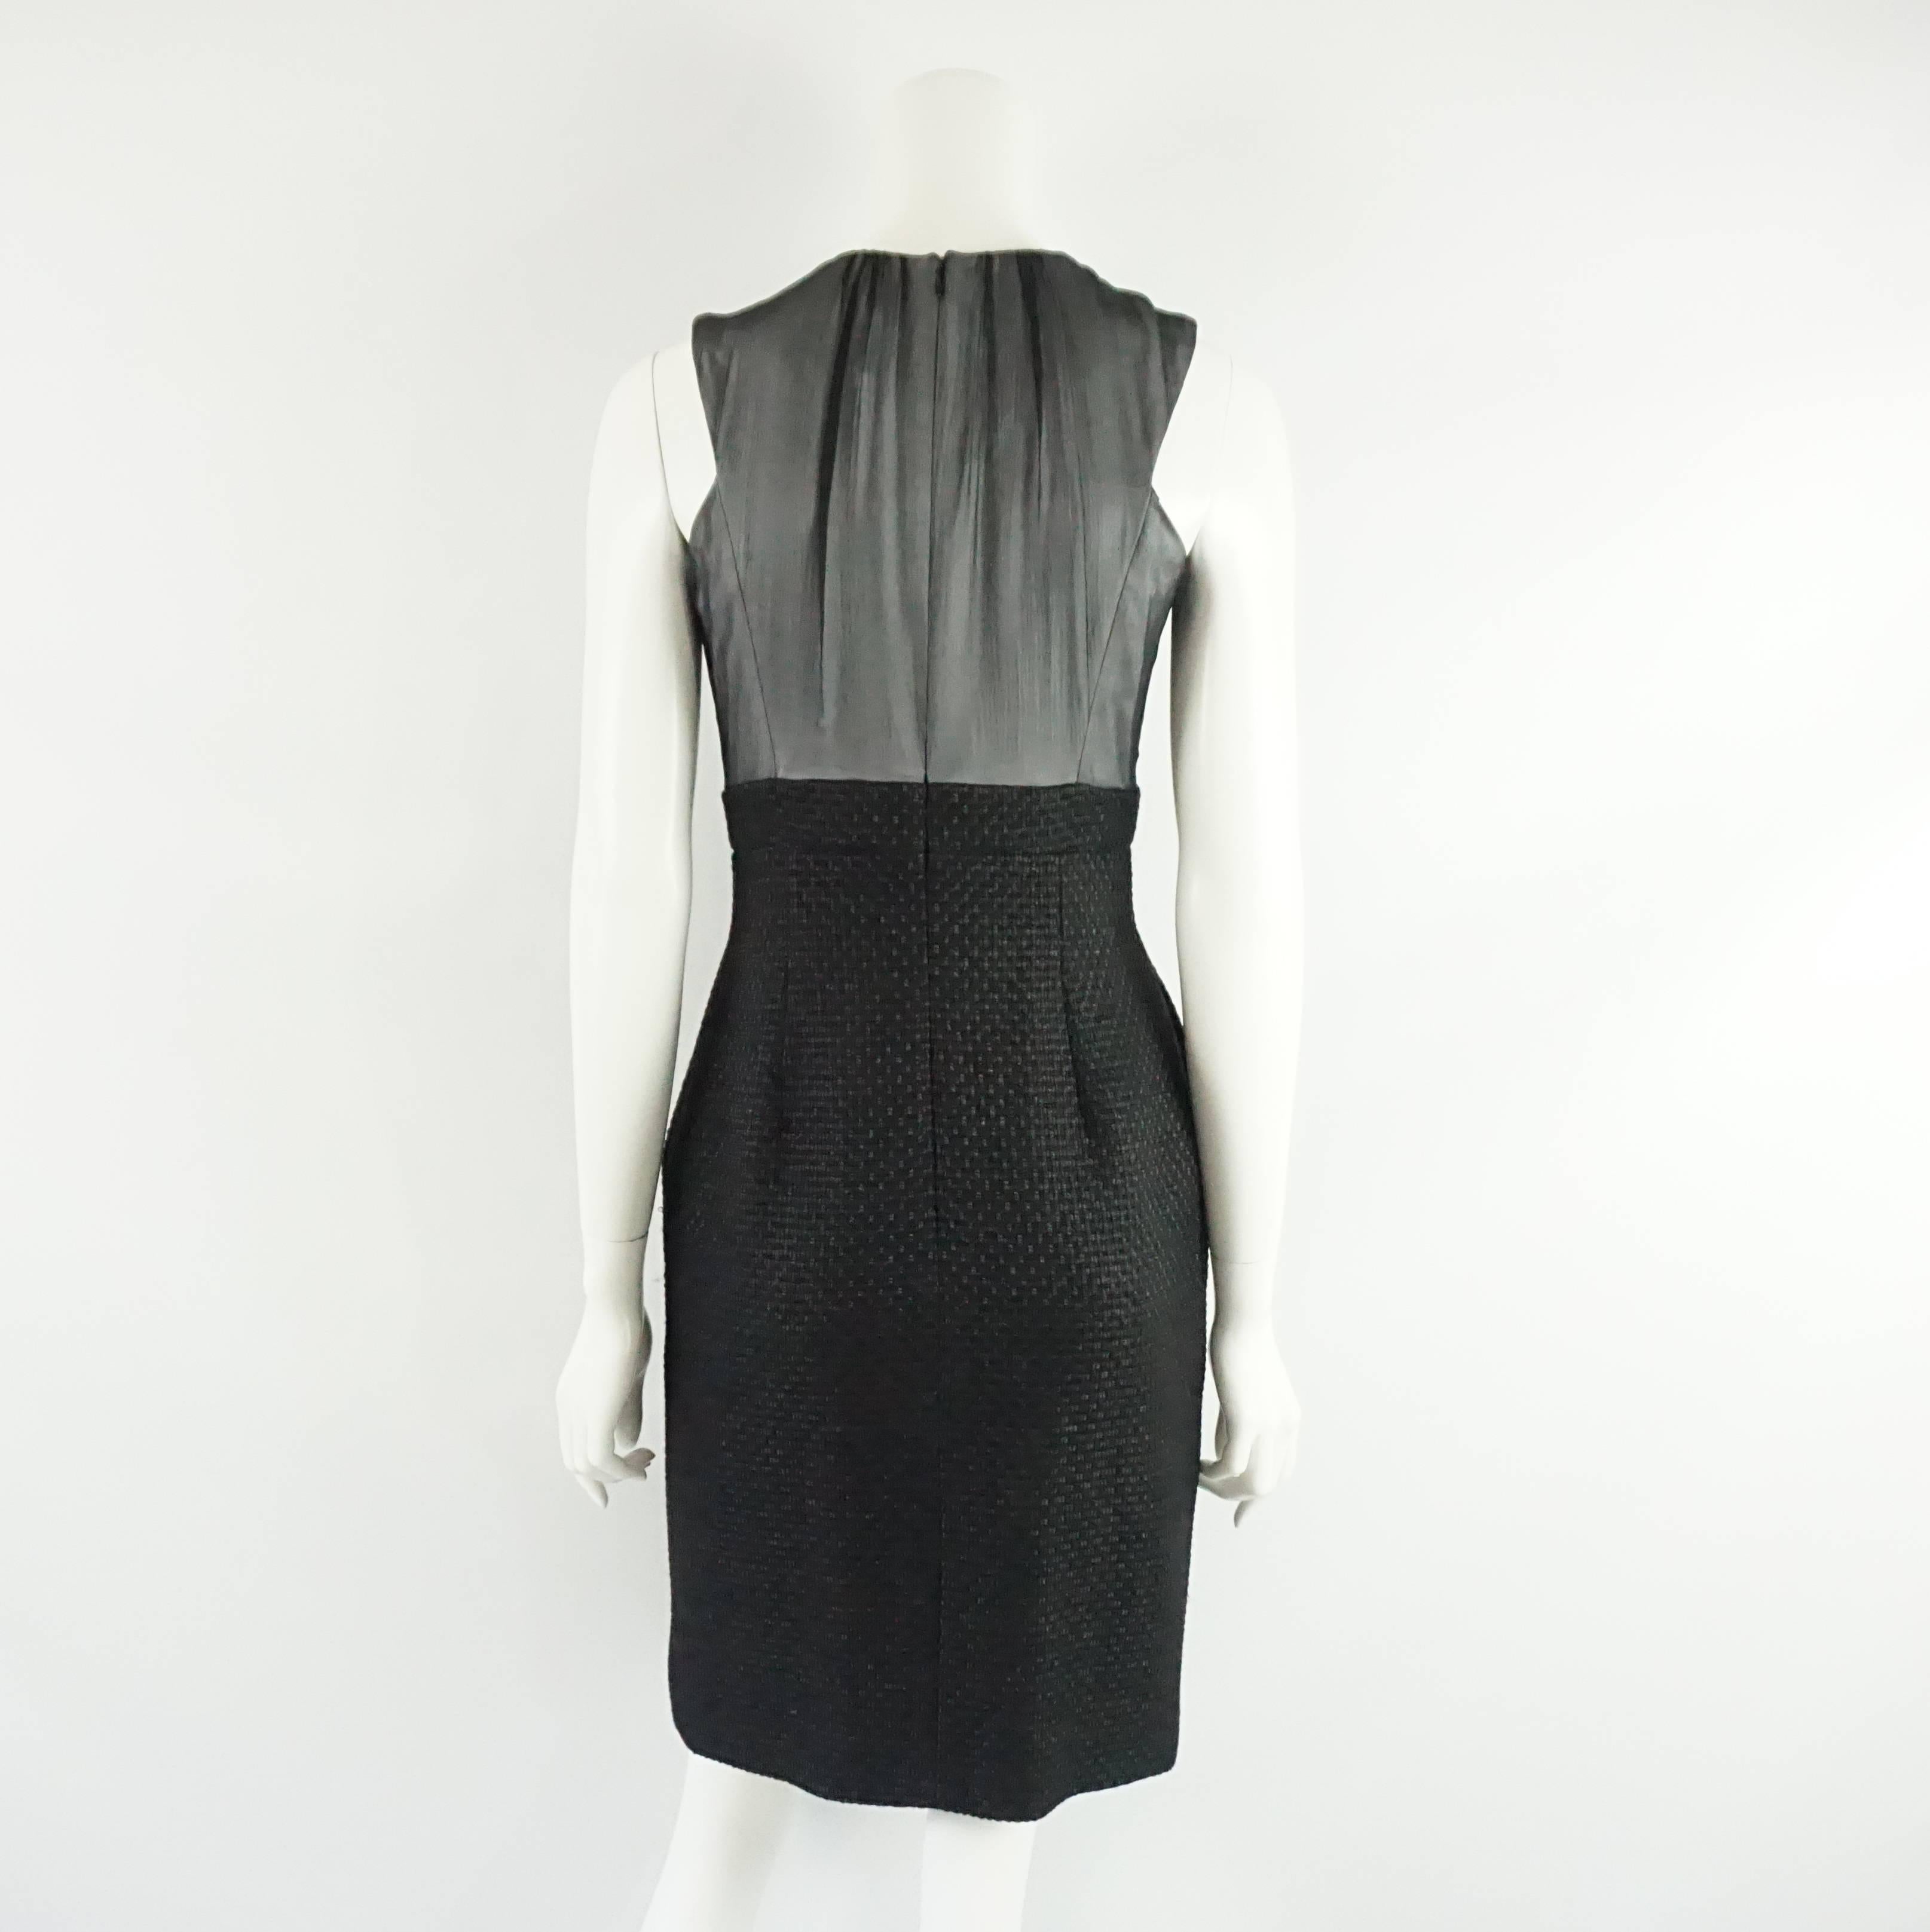 Chanel Black Dress with Silk Chiffon Top and Tweed Skirt - 38 In Excellent Condition For Sale In West Palm Beach, FL